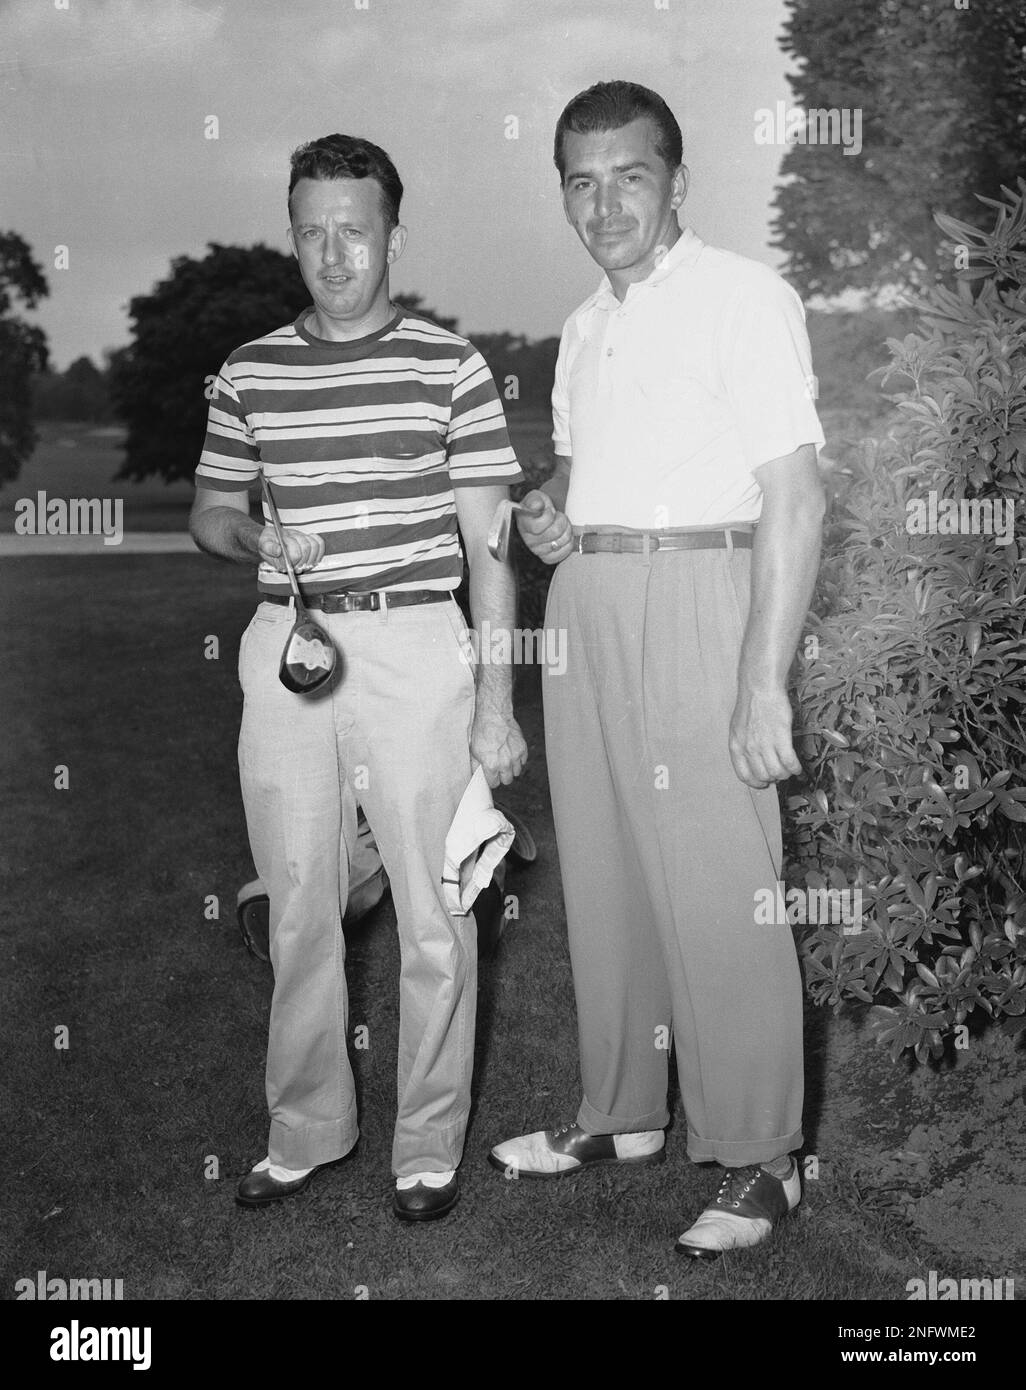 https://c8.alamy.com/comp/2NFWME2/golfer-ray-billows-of-poughkeepsie-ny-left-metropolitan-amateur-golf-champion-and-julius-boros-of-bridgeport-conn-pose-together-at-deepdale-country-club-in-great-neck-ny-aug-18-1948-boros-carded-a-135-and-billows-a-141-to-pace-the-field-of-68-seeking-14-qualifying-spots-for-the-national-amateur-golf-tournament-ap-photo-2NFWME2.jpg